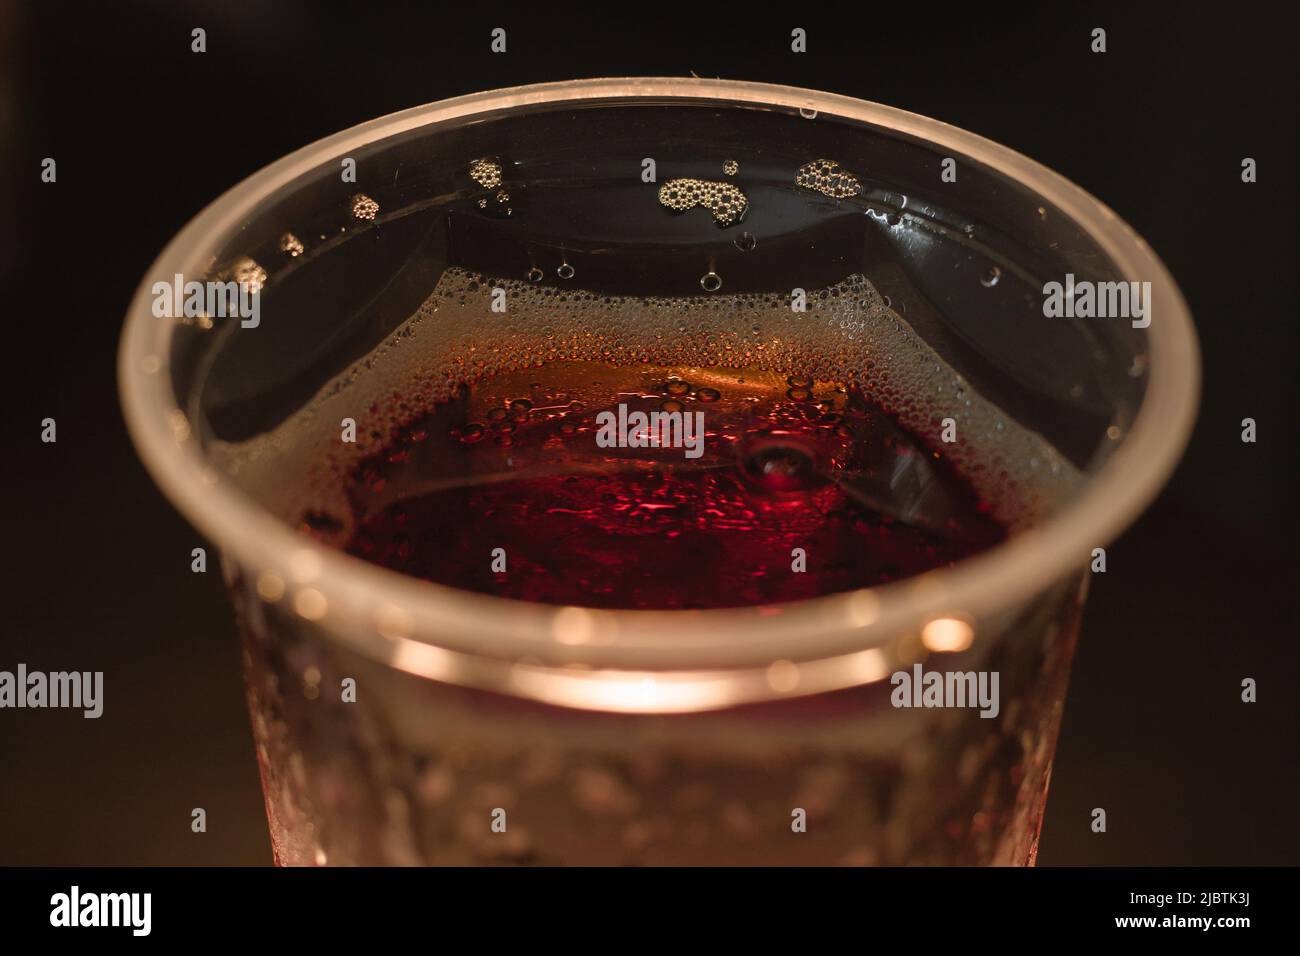 Cola with fizz in a plastic glass. Closeup, night. Stock Photo